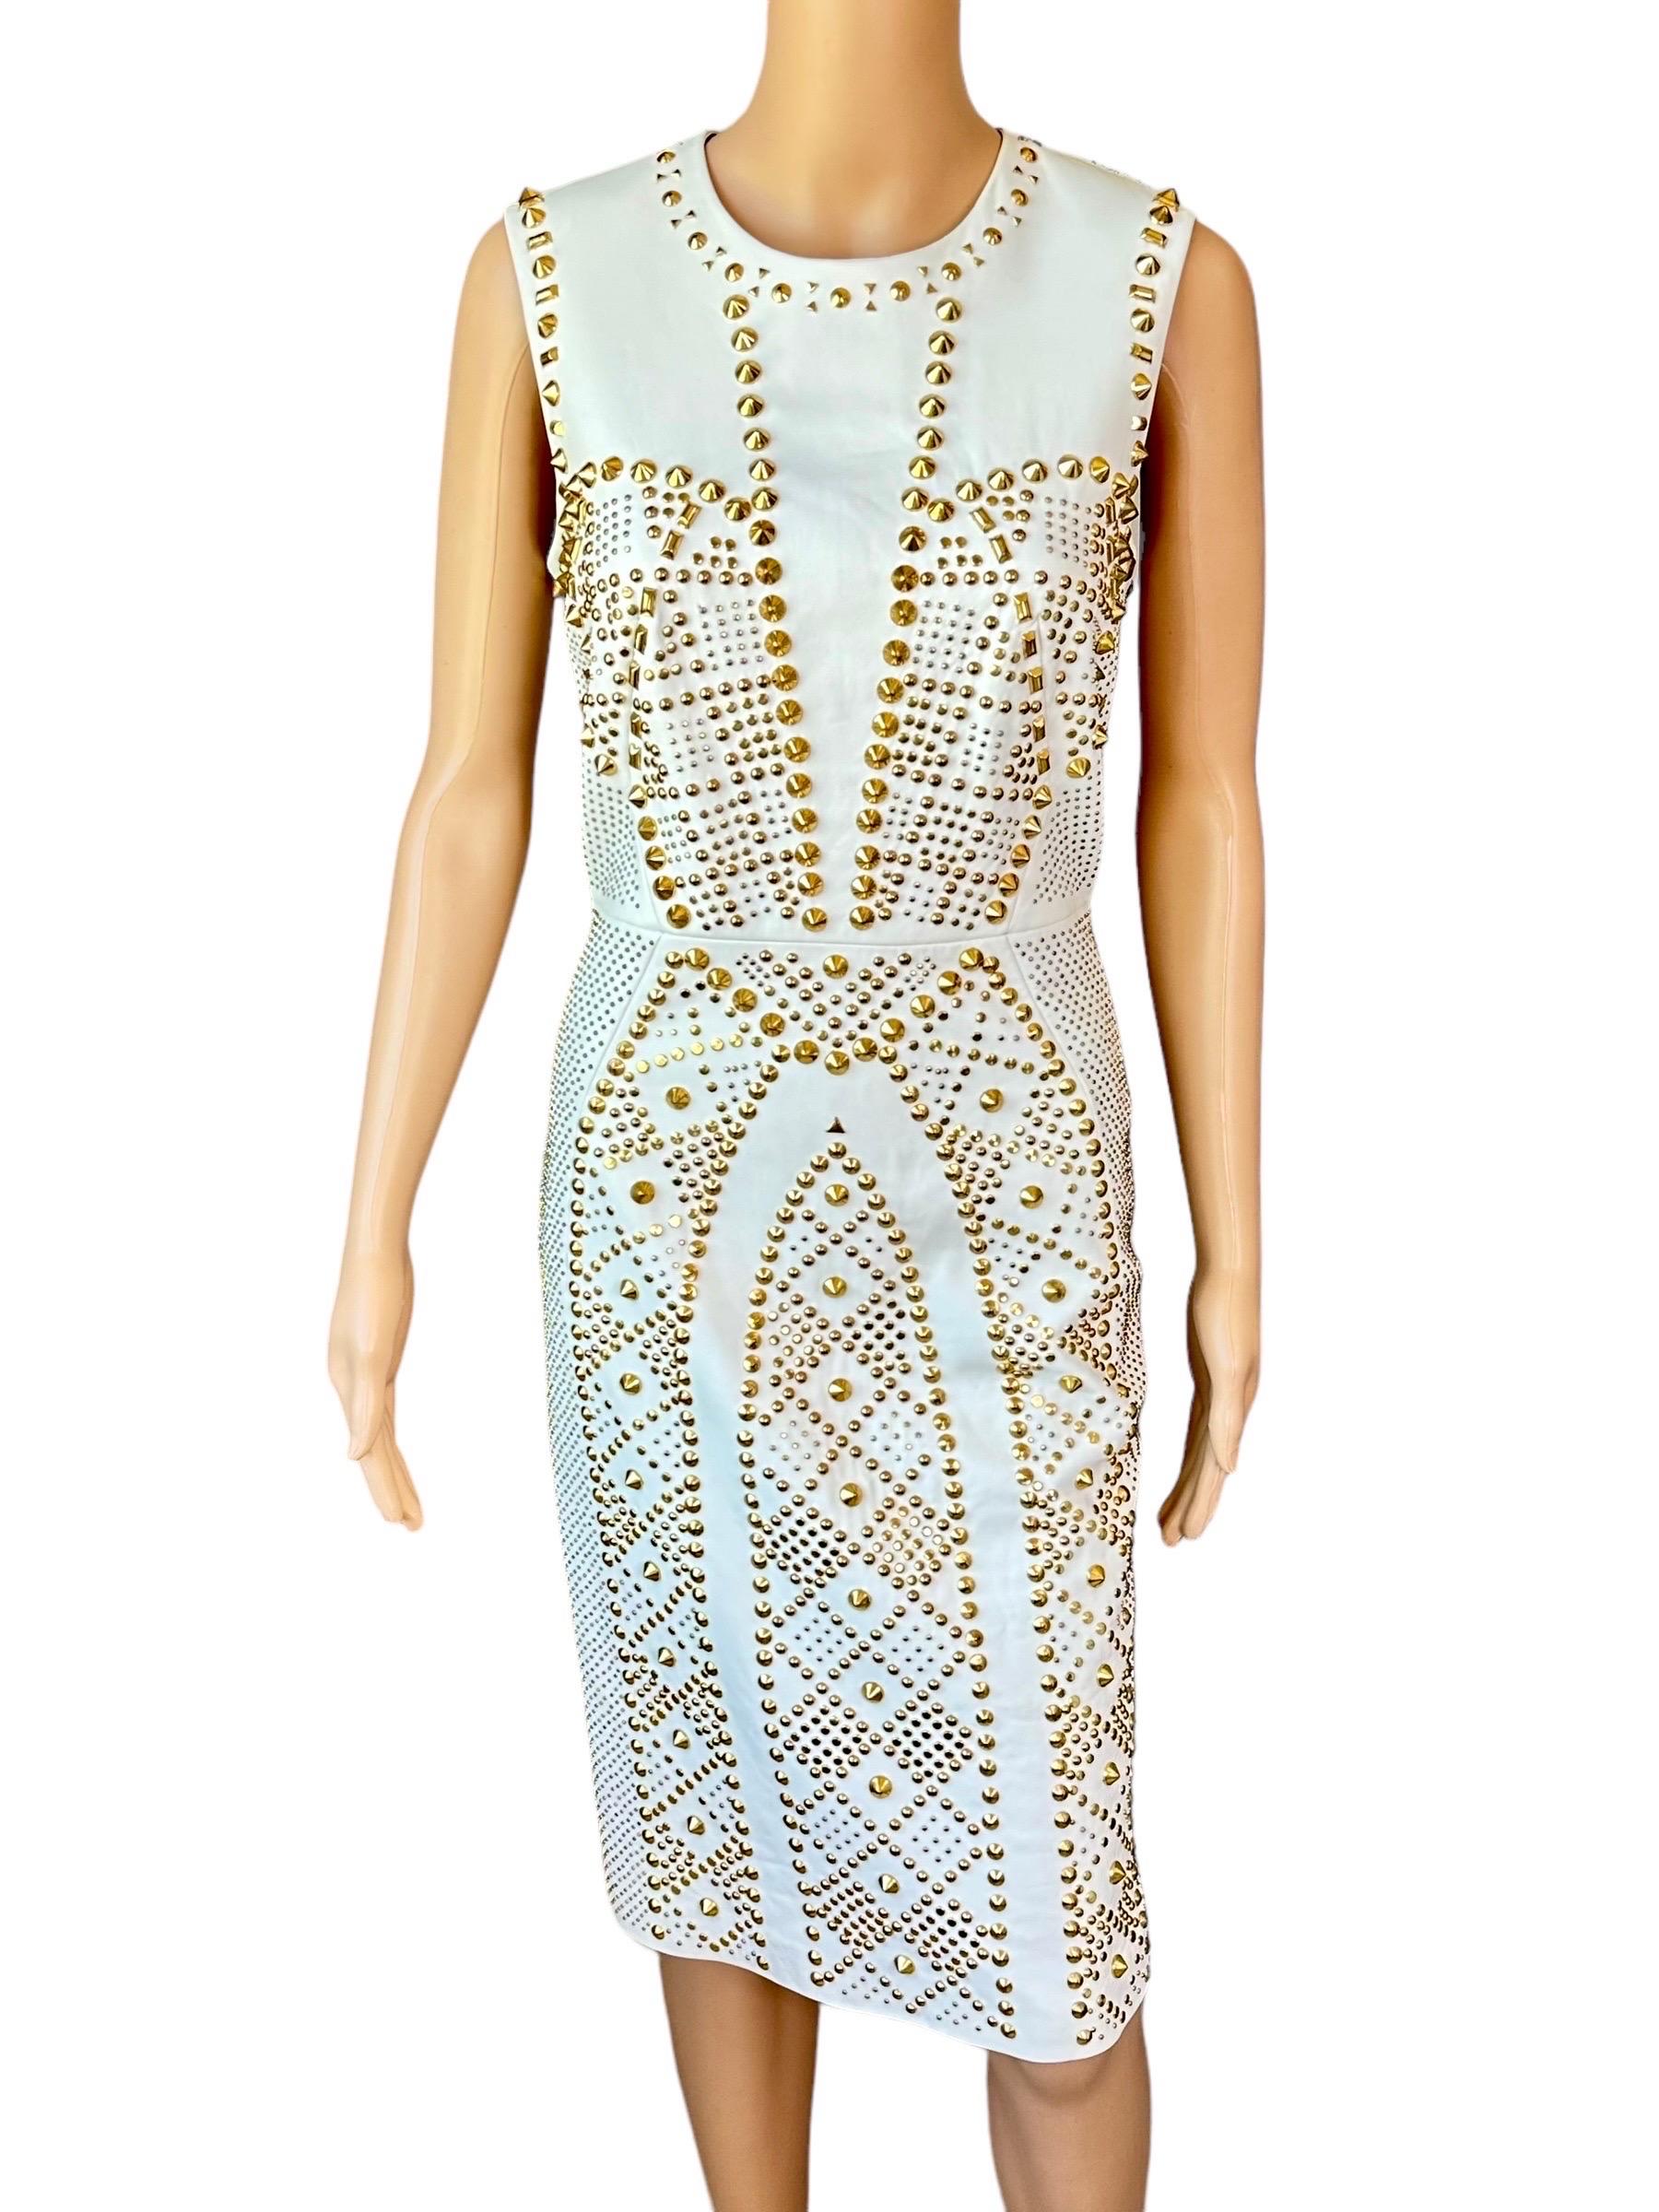 Women's Versace S/S 2012 Runway Embellished Gold Studded Ivory Leather Dress  For Sale